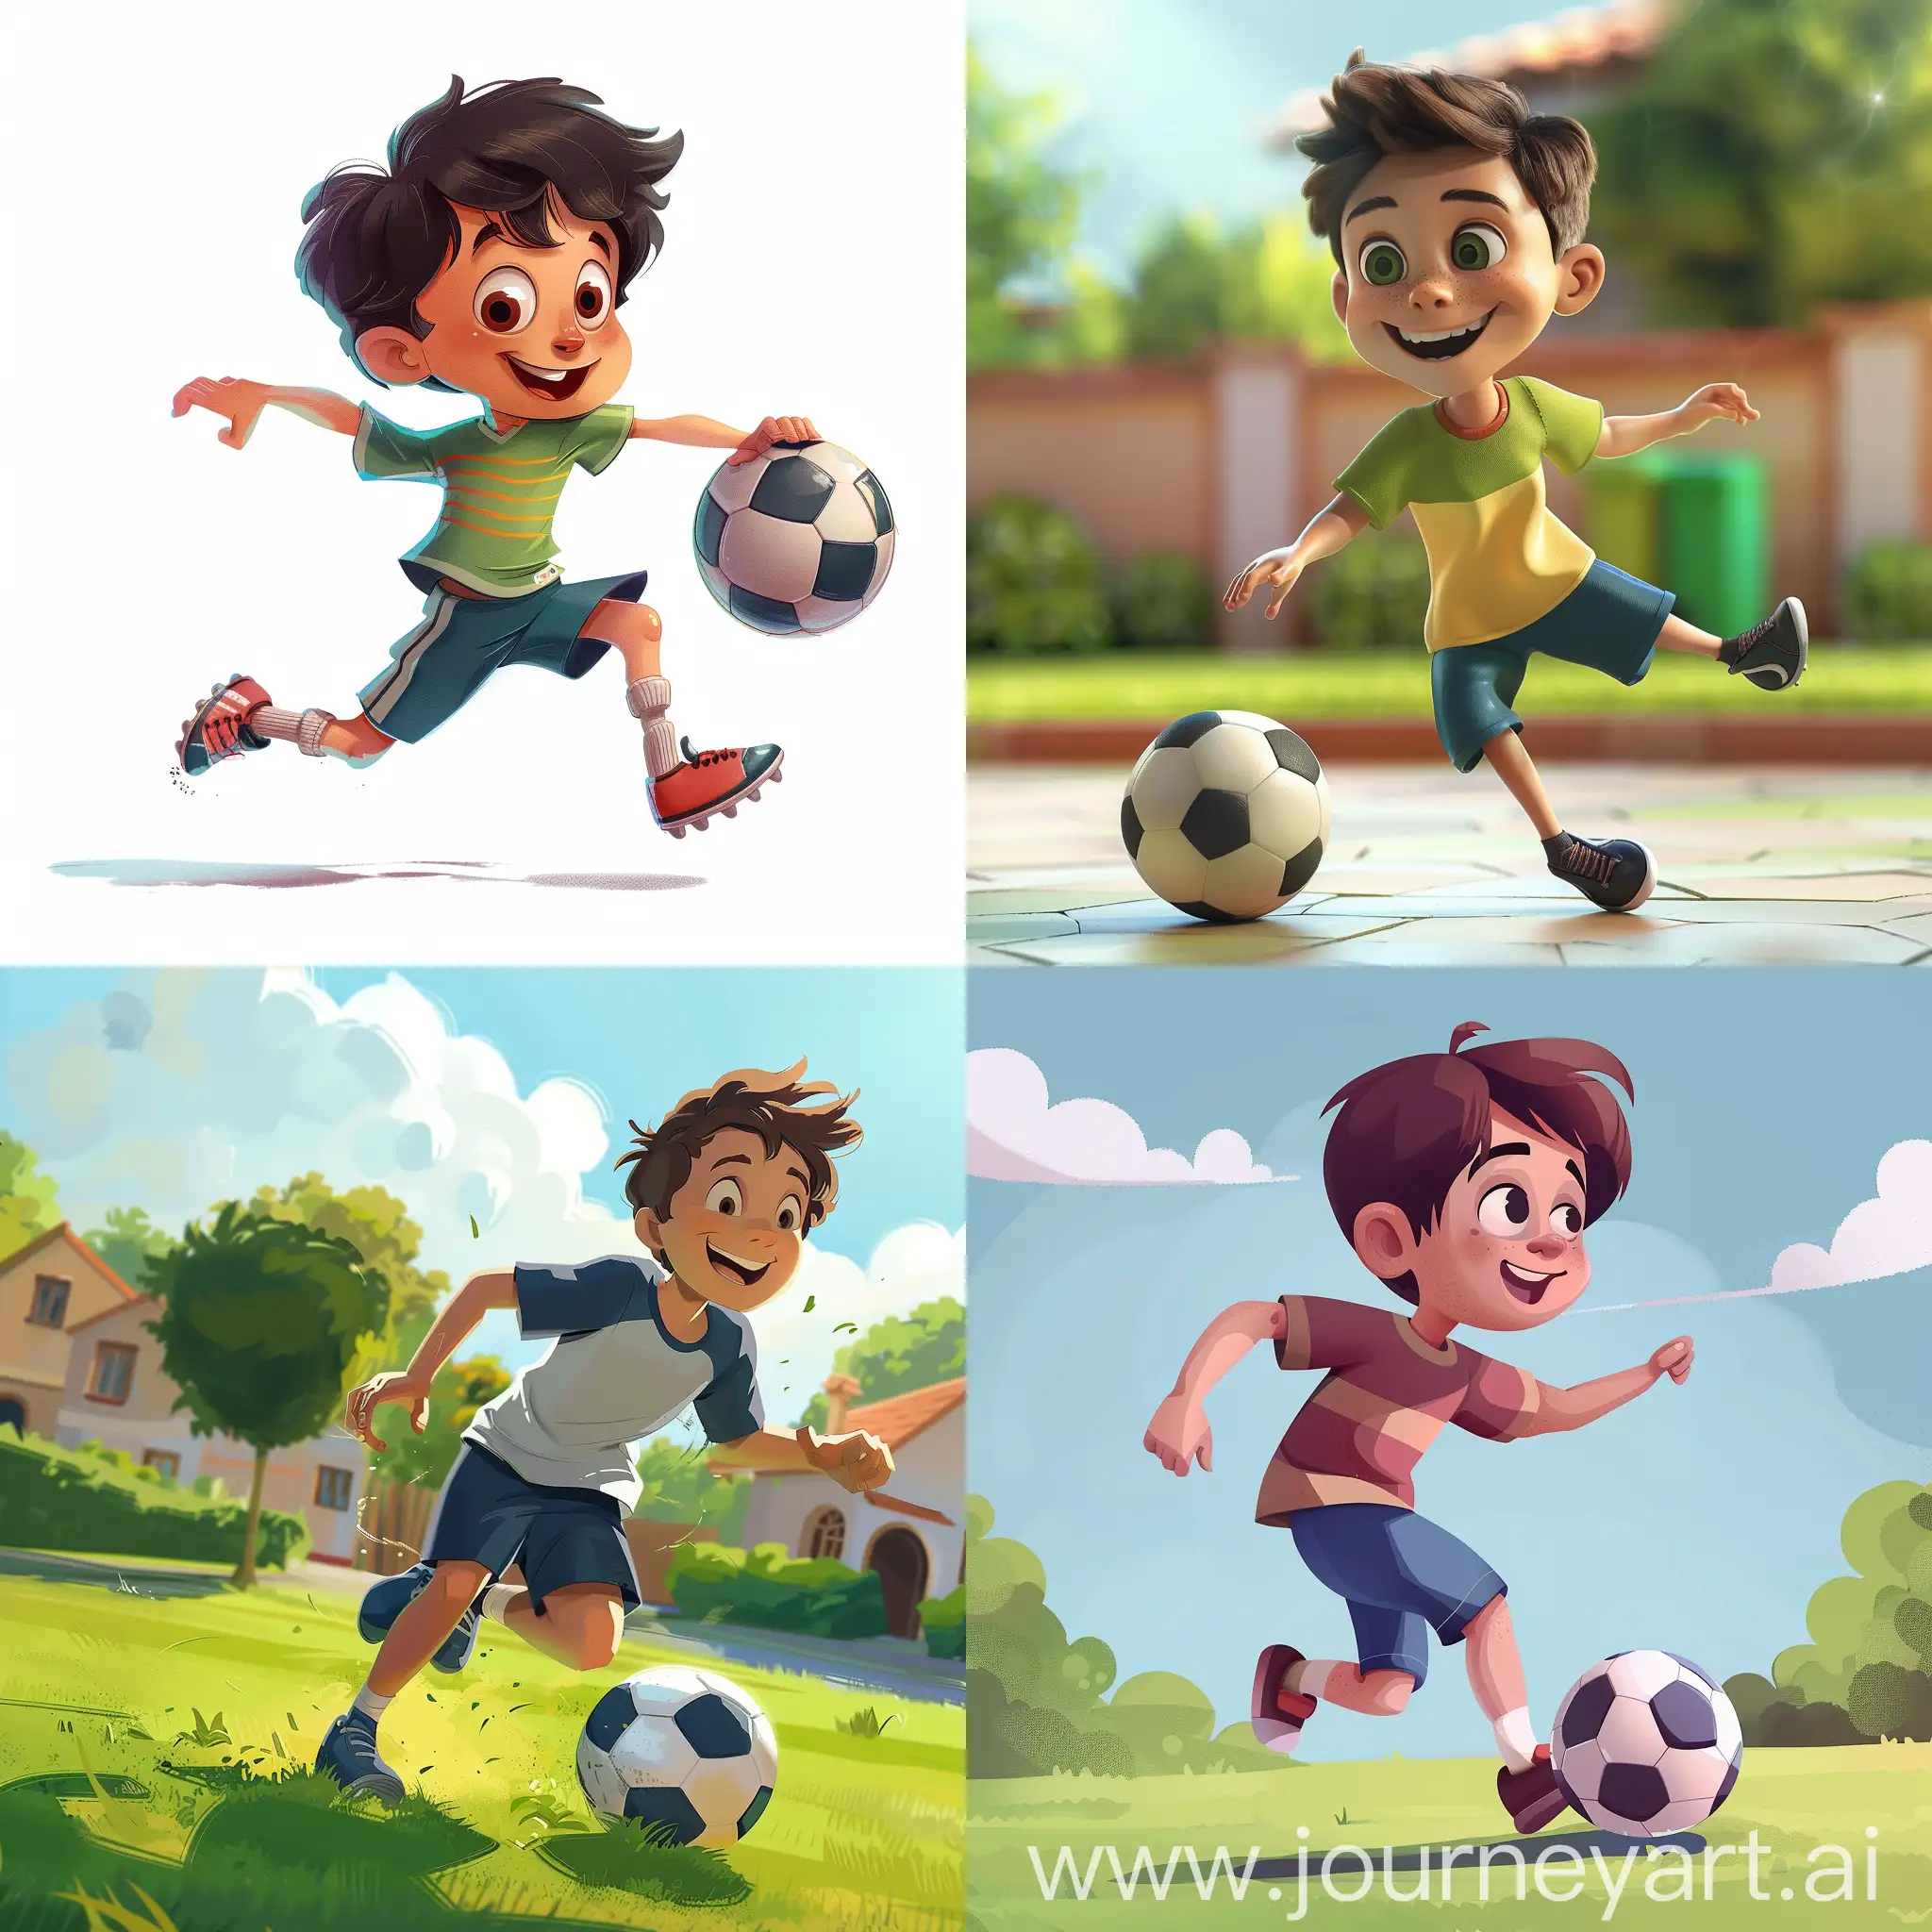 Boy-Playing-Football-in-Pixar-Style